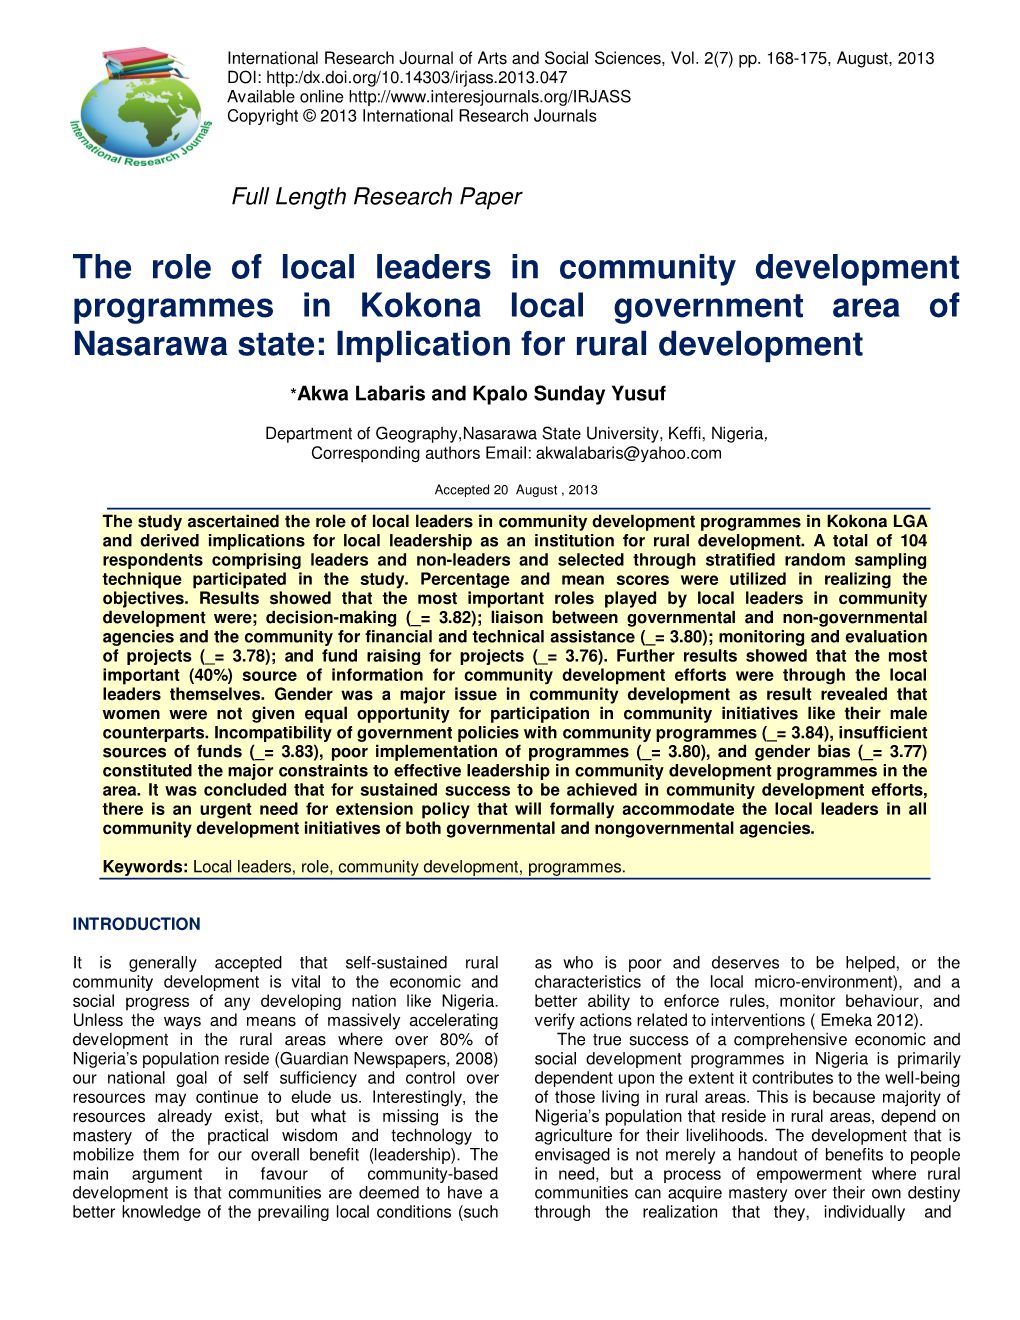 The Role of Local Leaders in Community Development Programmes in Kokona Local Government Area of Nasarawa State: Implication for Rural Development